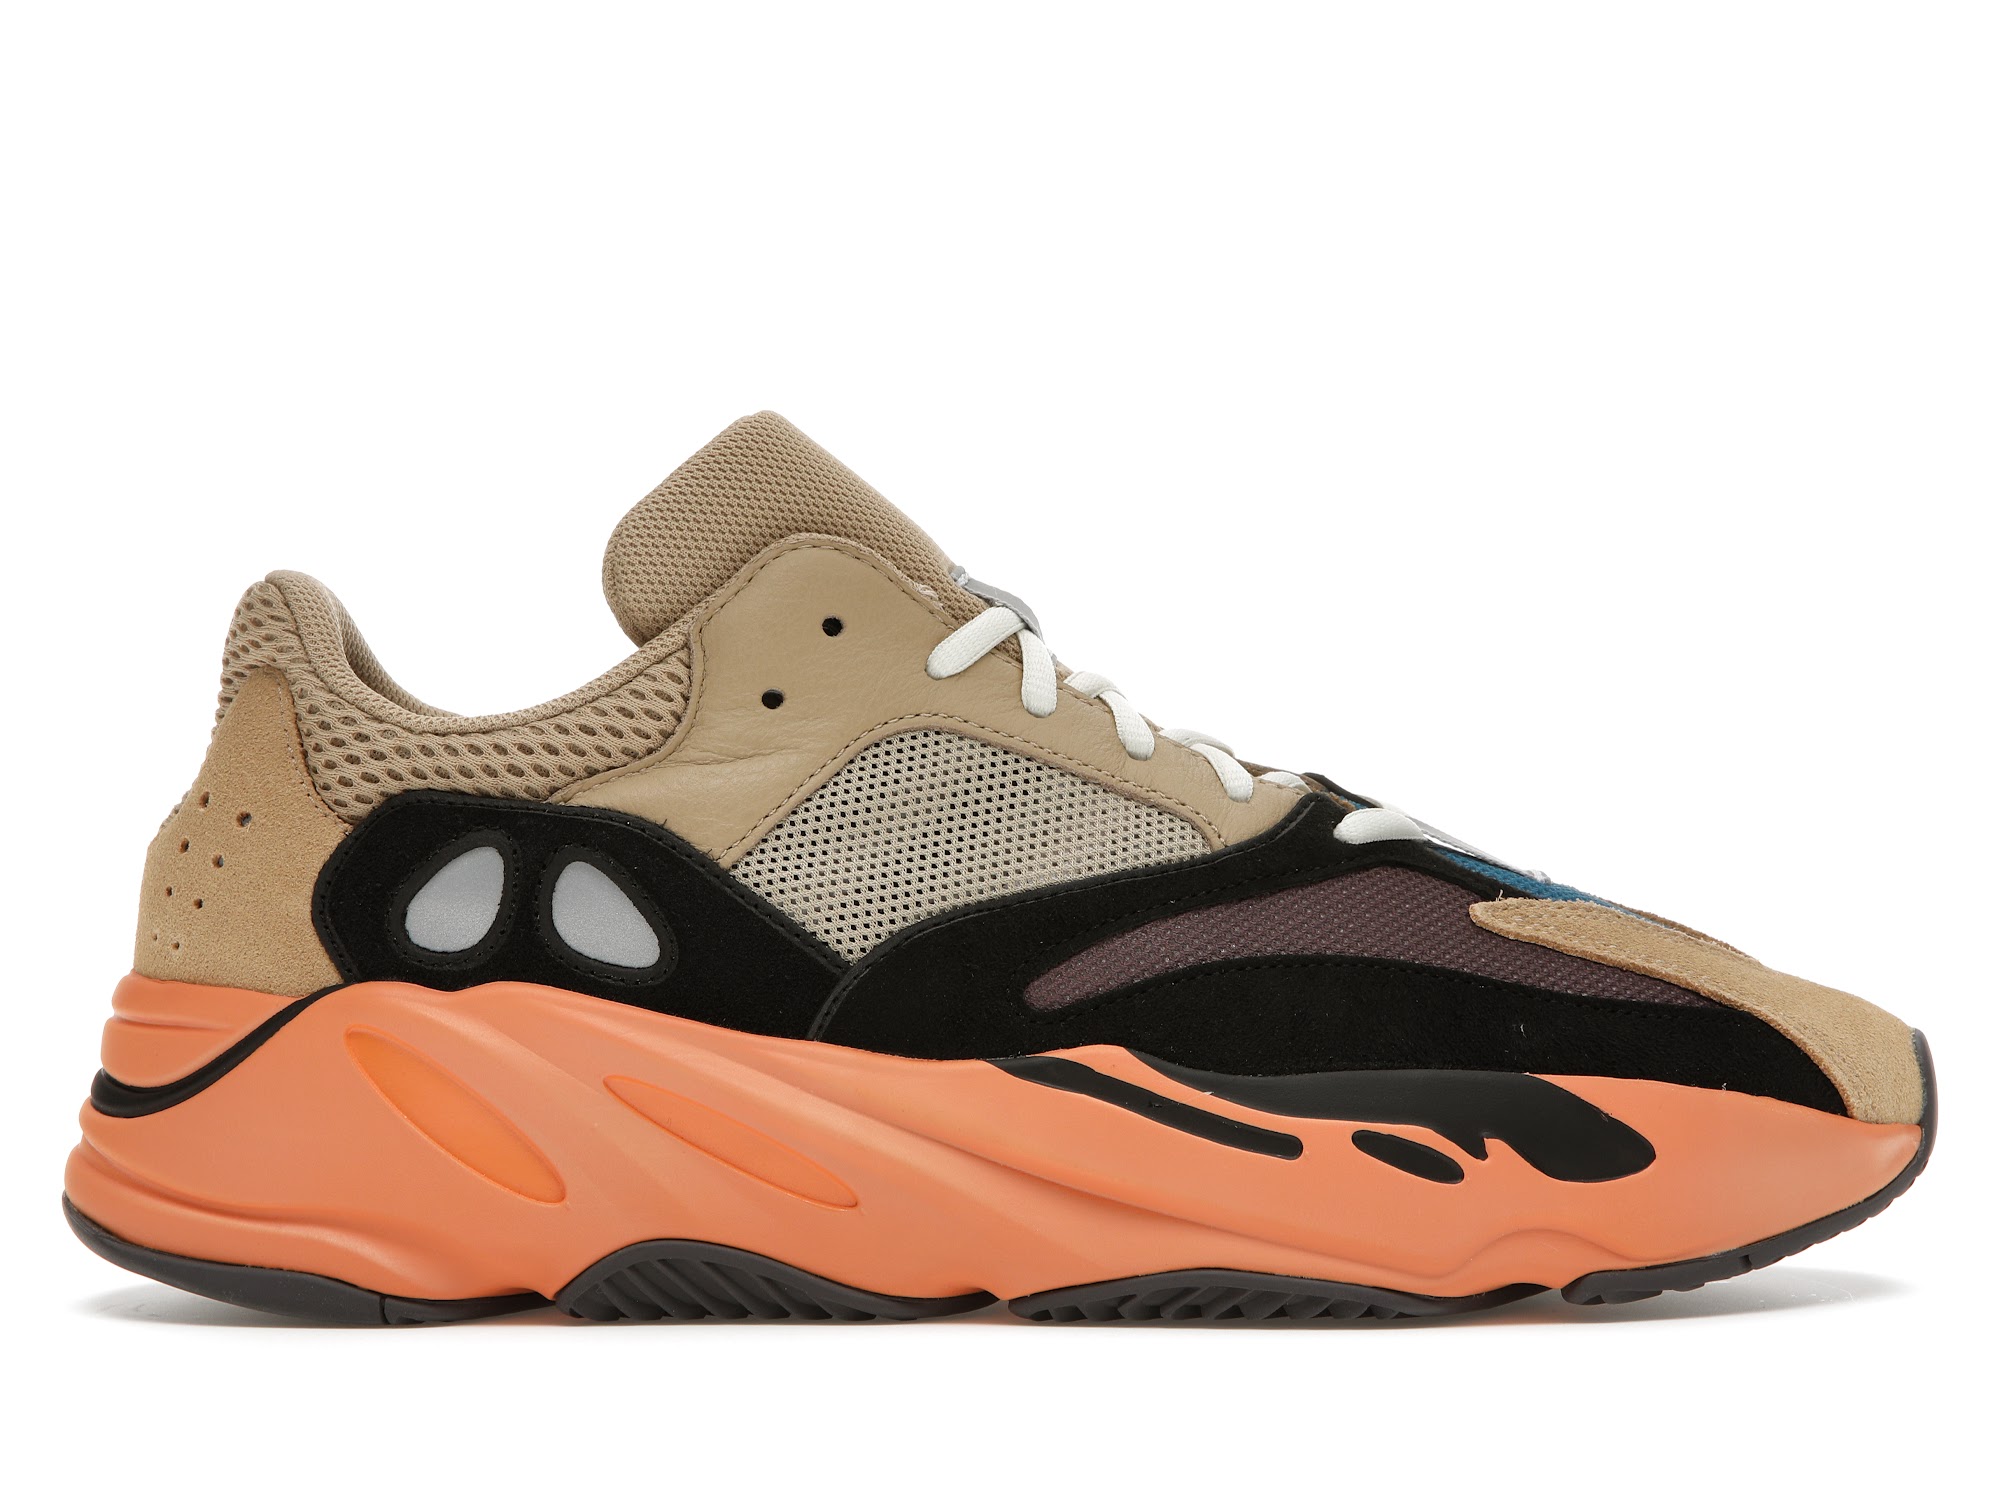 adidas Yeezy Boost 700 Enflame Amber Men's - GW0297 - US